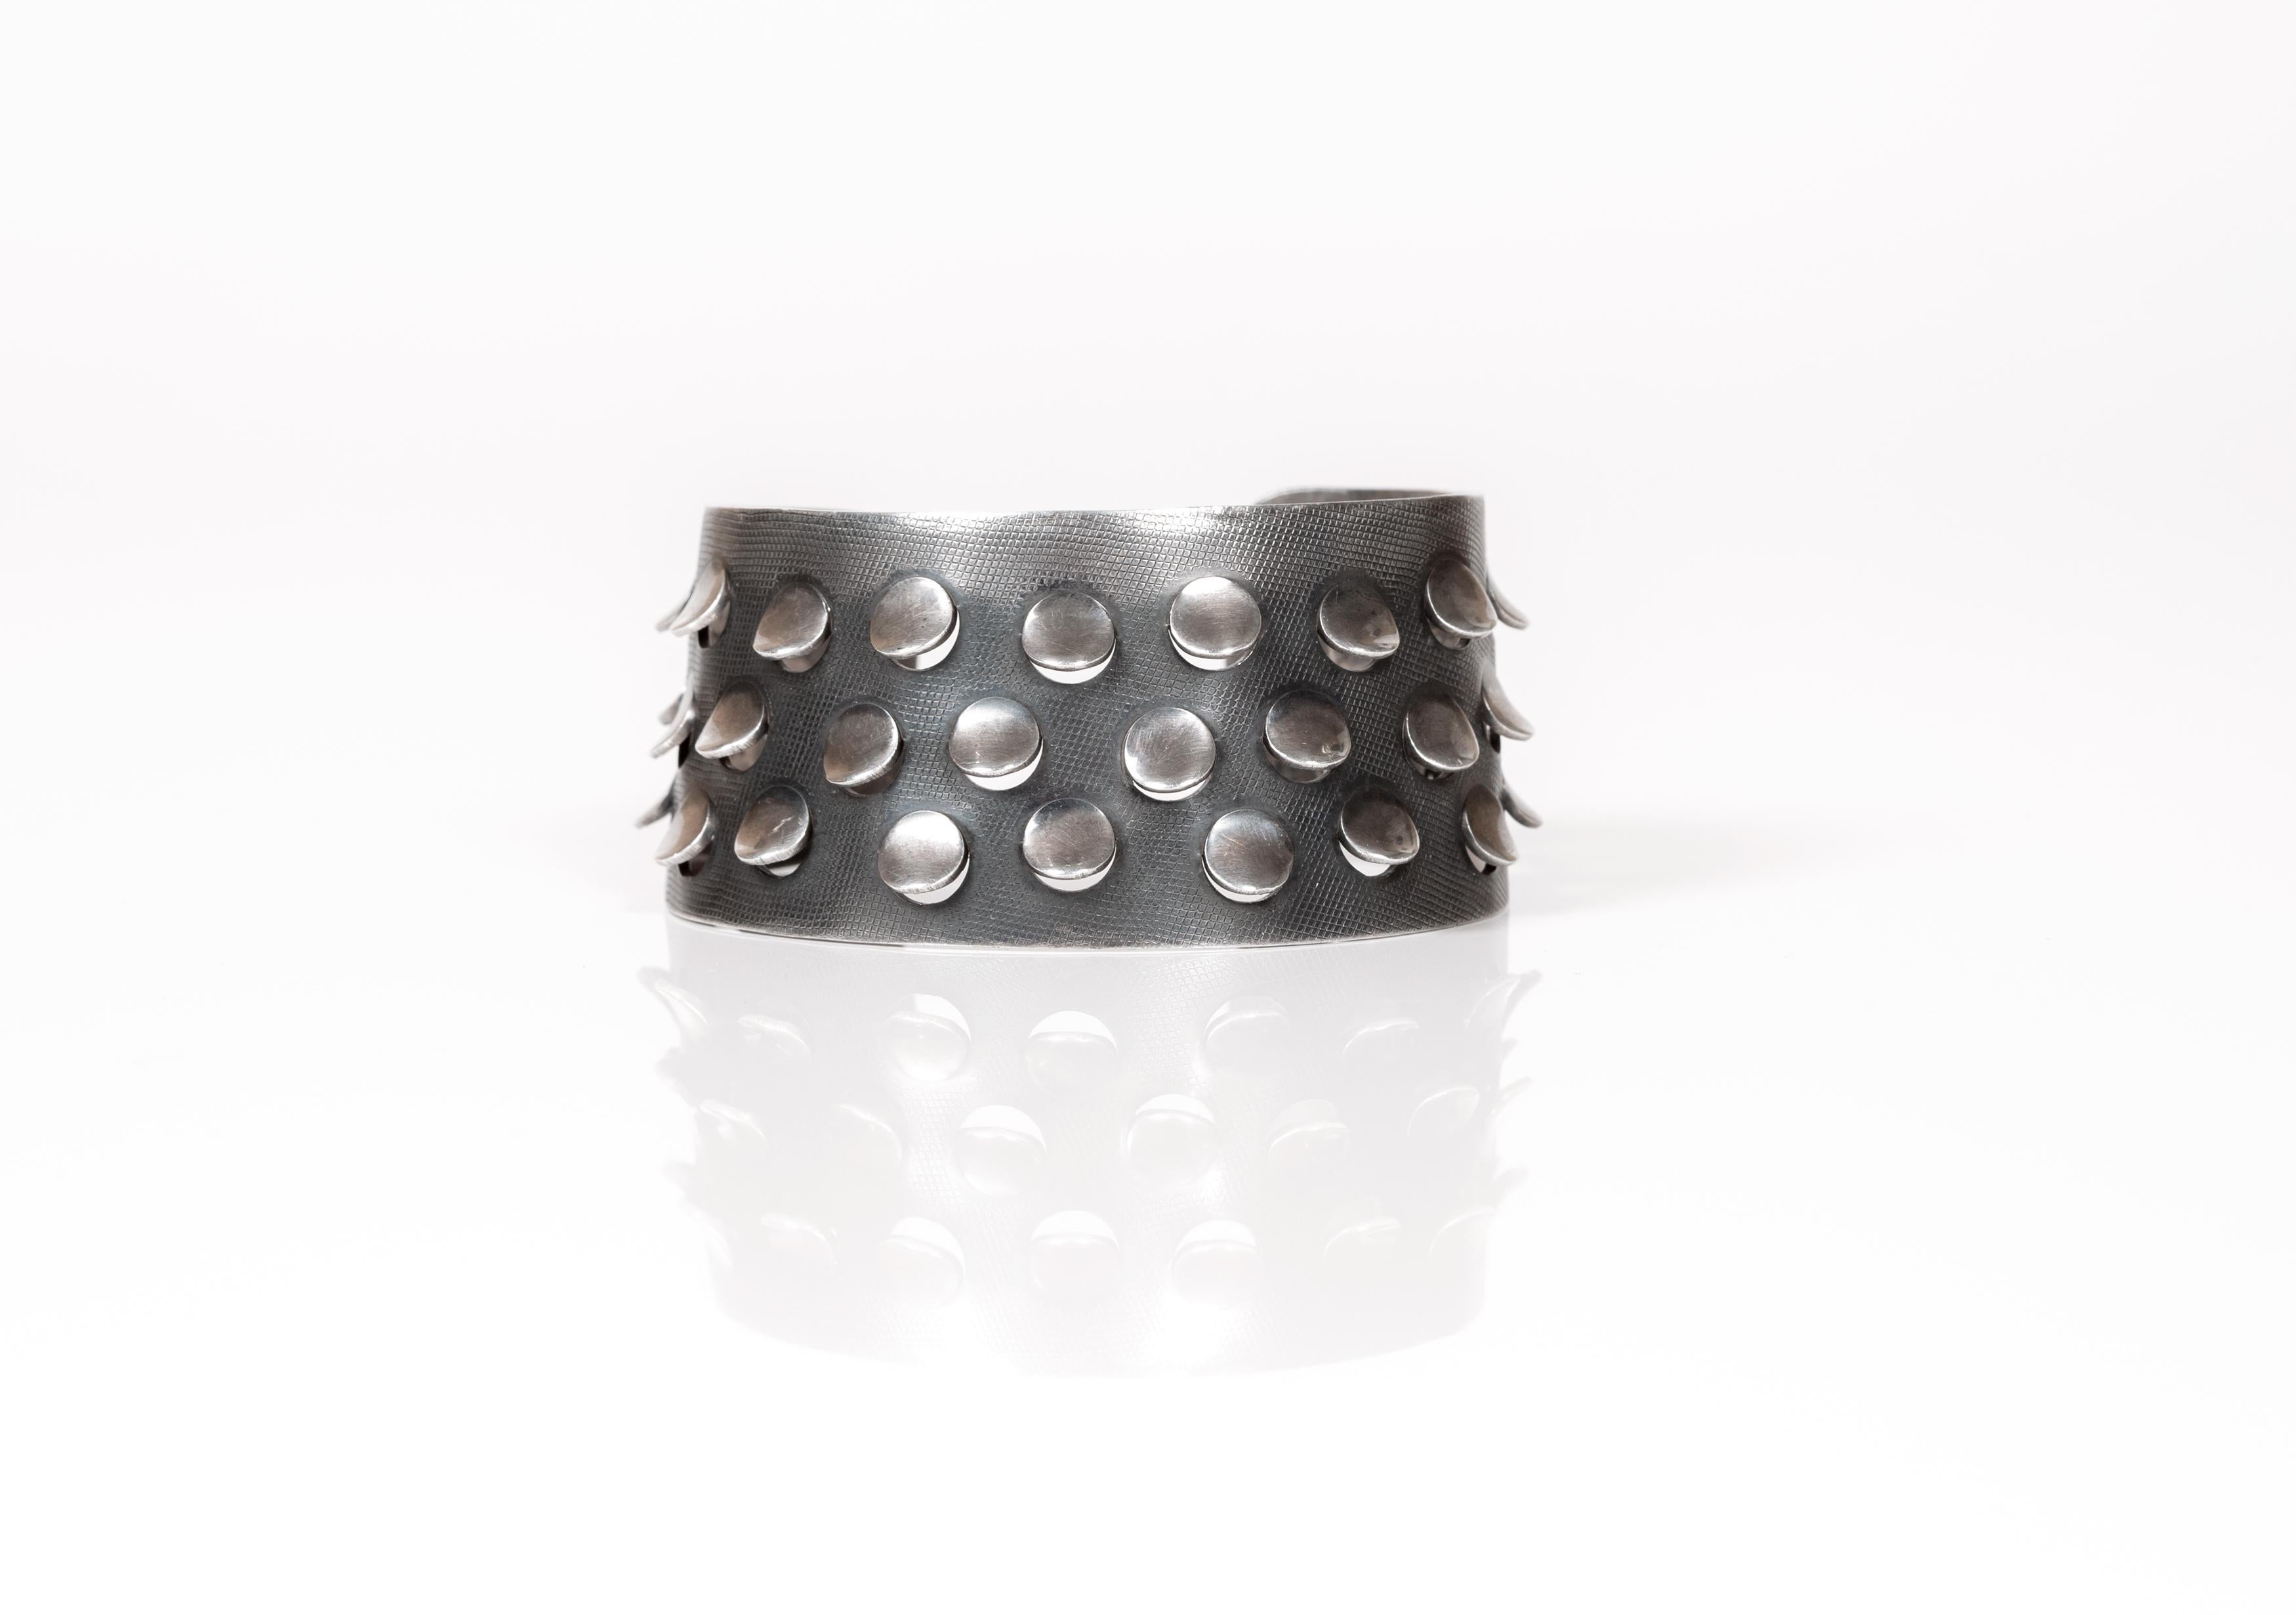 Wonderful and decorative silver bracelet in guilloche pattern, with raised incision points. Designed by Grete Prytz Kittelsen for J. Tostrup from ca 1950s first half. 